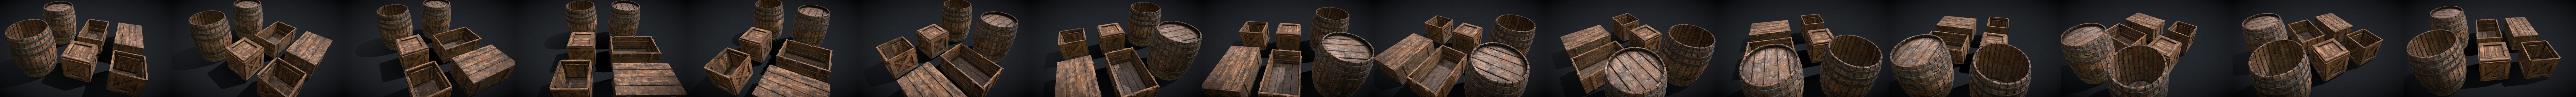 3D Model Collection Medieval Storage Props Chests Barrels Crates 44 Item VR  / AR / low-poly